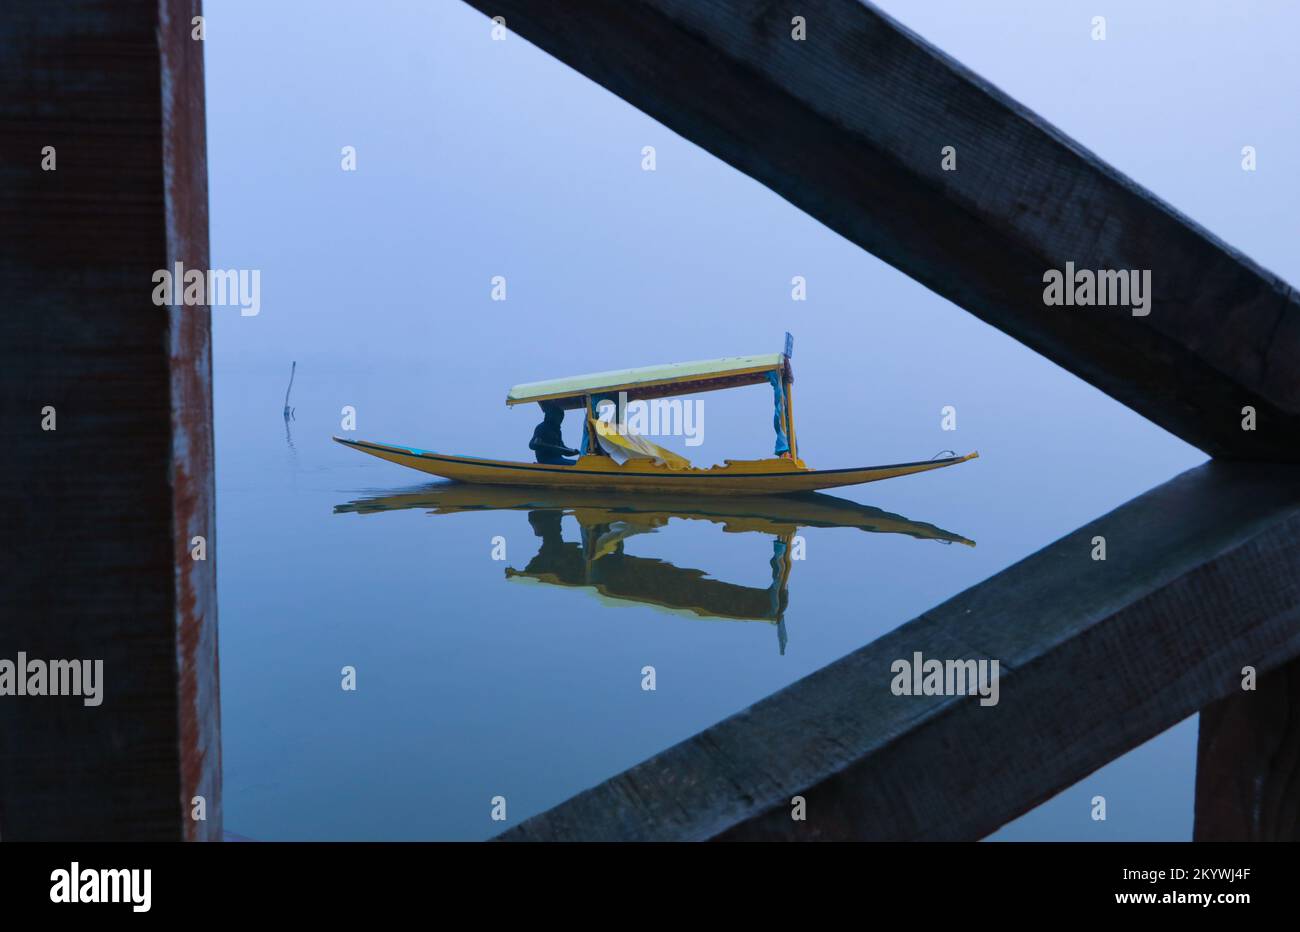 December 2, 2022, Srinagar, Jammu and Kashmir, India: A man rows a boat amid dense fog in the Dal Lake in Srinagar. Jammu and Kashmir are witnessing the brunt of climate change and the average mean temperature in the last 28 years has climbed up by 2.32°C and 1.45°C. (Credit Image: © Adil Abbas/ZUMA Press Wire) Stock Photo